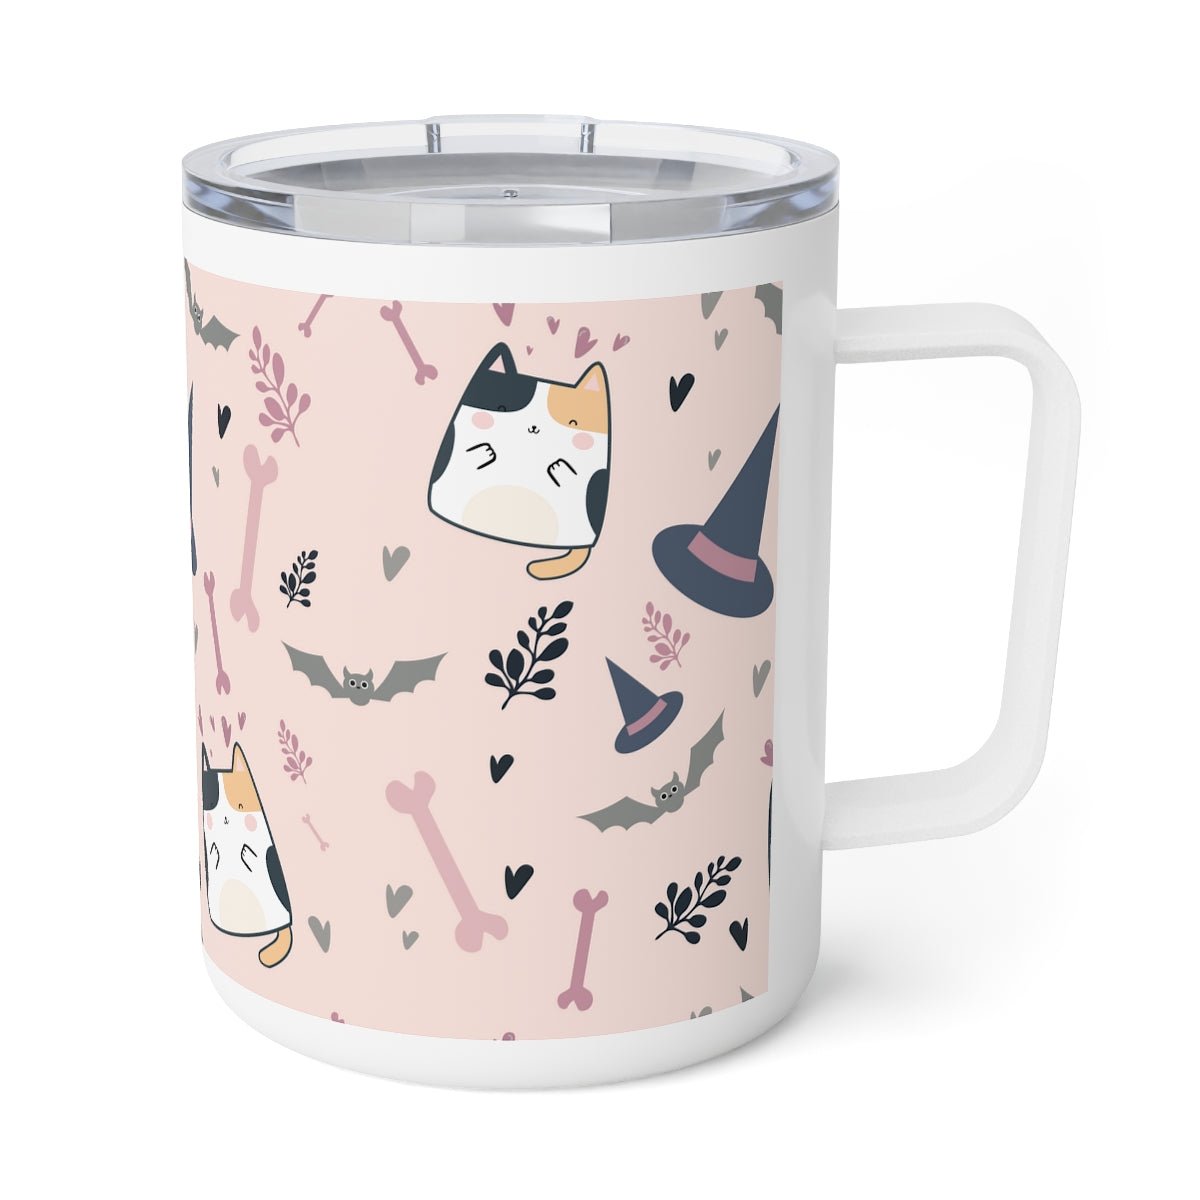 Halloween Cats and Bats Insulated Coffee Mug, 10oz - Puffin Lime